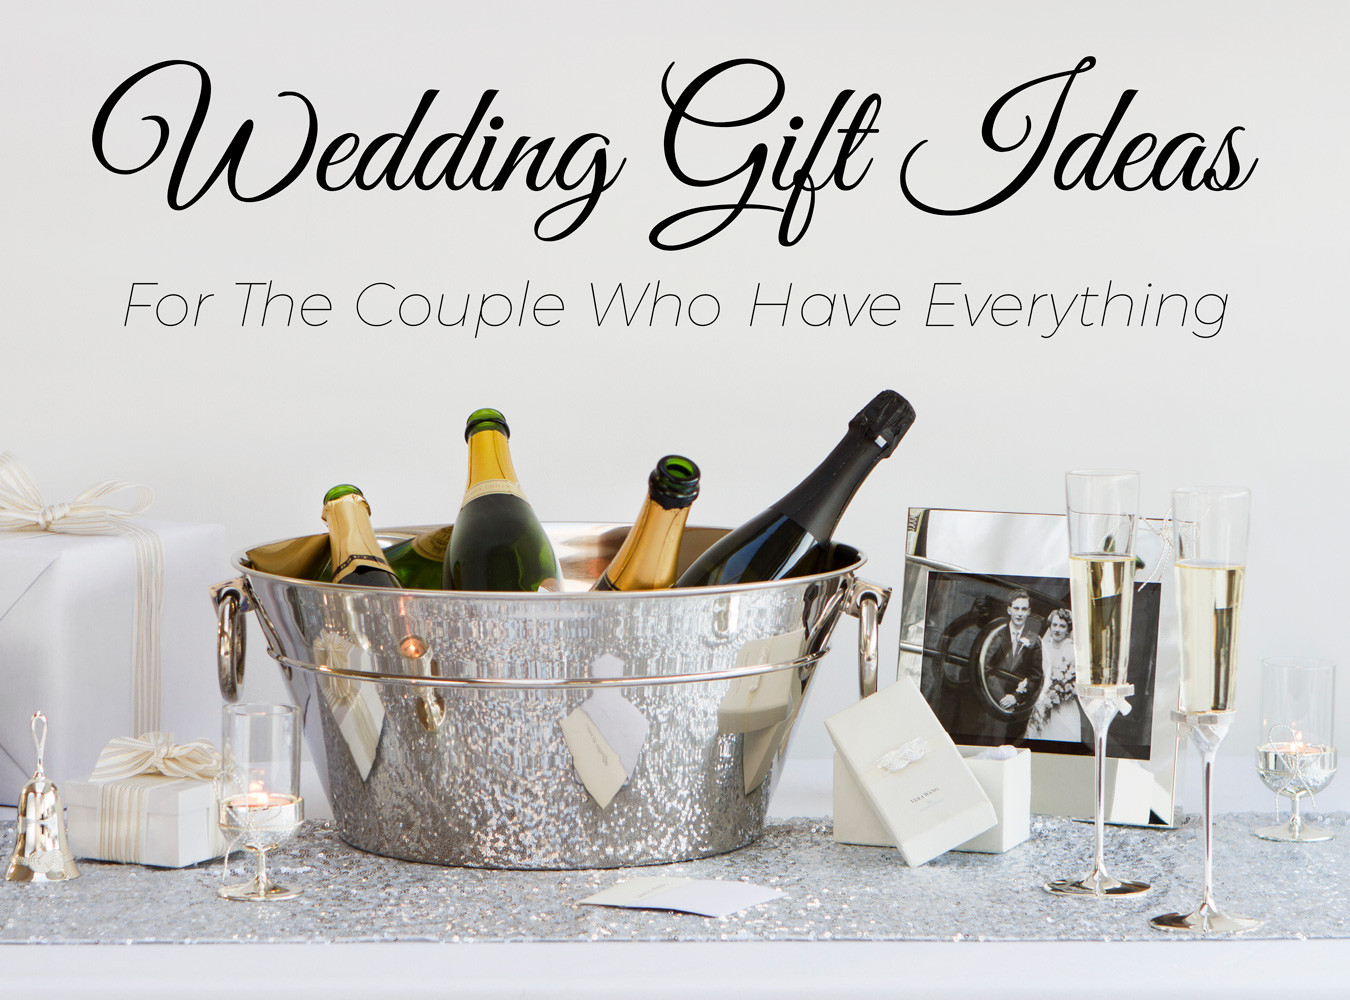 Christmas Gift Ideas For A Couple That Has Everything
 Gift Ideas For Couples Who Have Everything